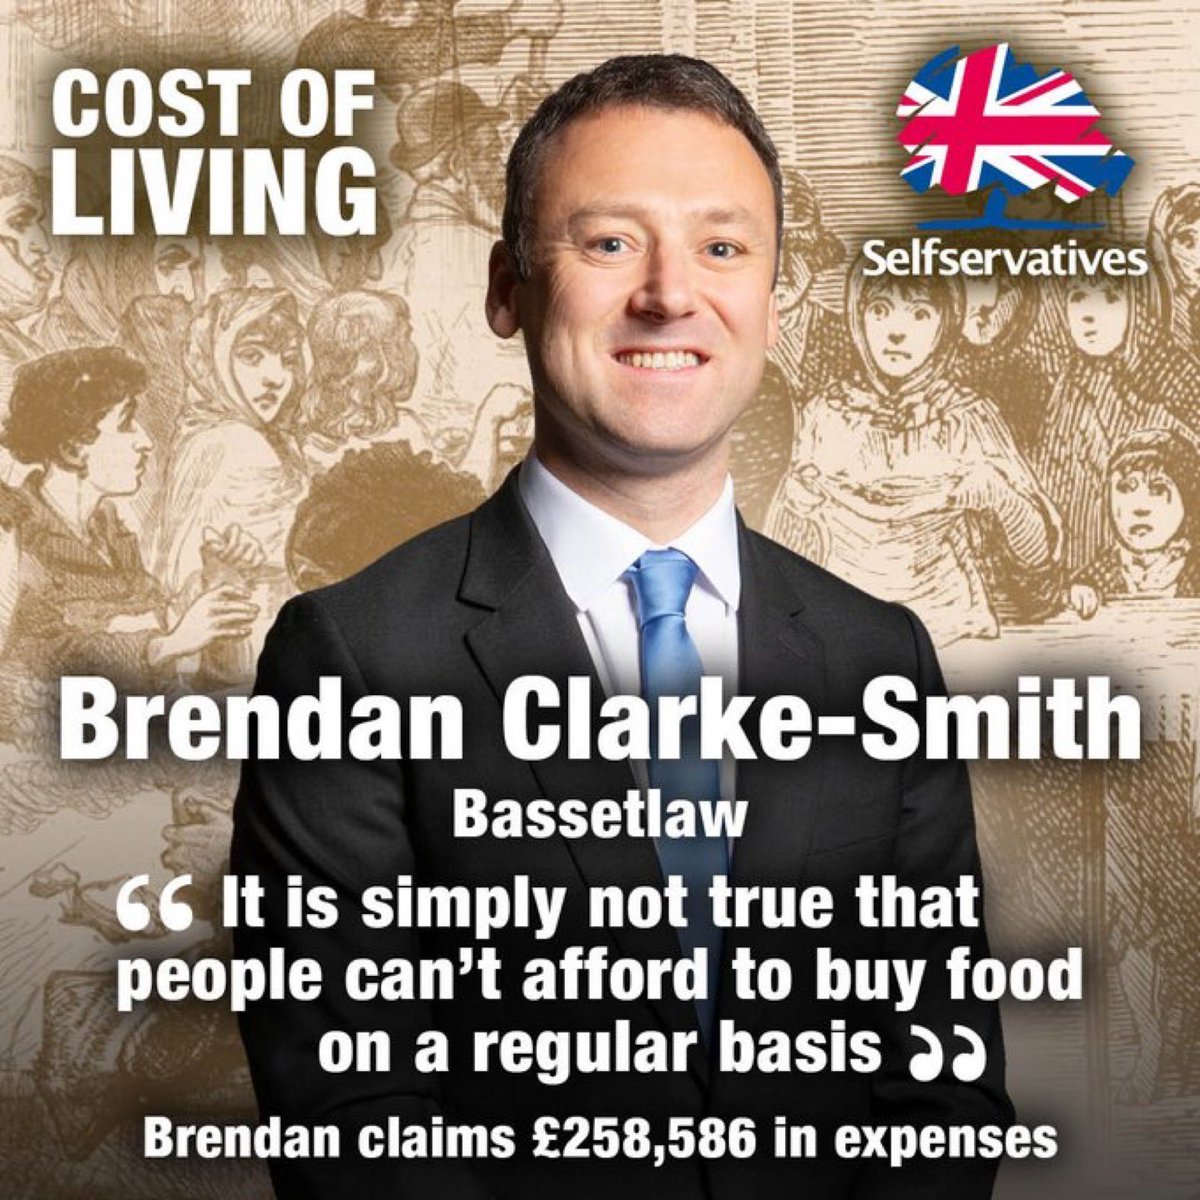 #BILLS TORY MP Brendan Clarke-Smith on higher food bills: 'It's untrue that people can't afford to buy food on a regular basis' Wow. Taxpayer subsidised HoC: 'Pressed chicken & caramelised onion with tarragon/chive jelly, pickled vegetables & thyme sourdough' at £2.84.